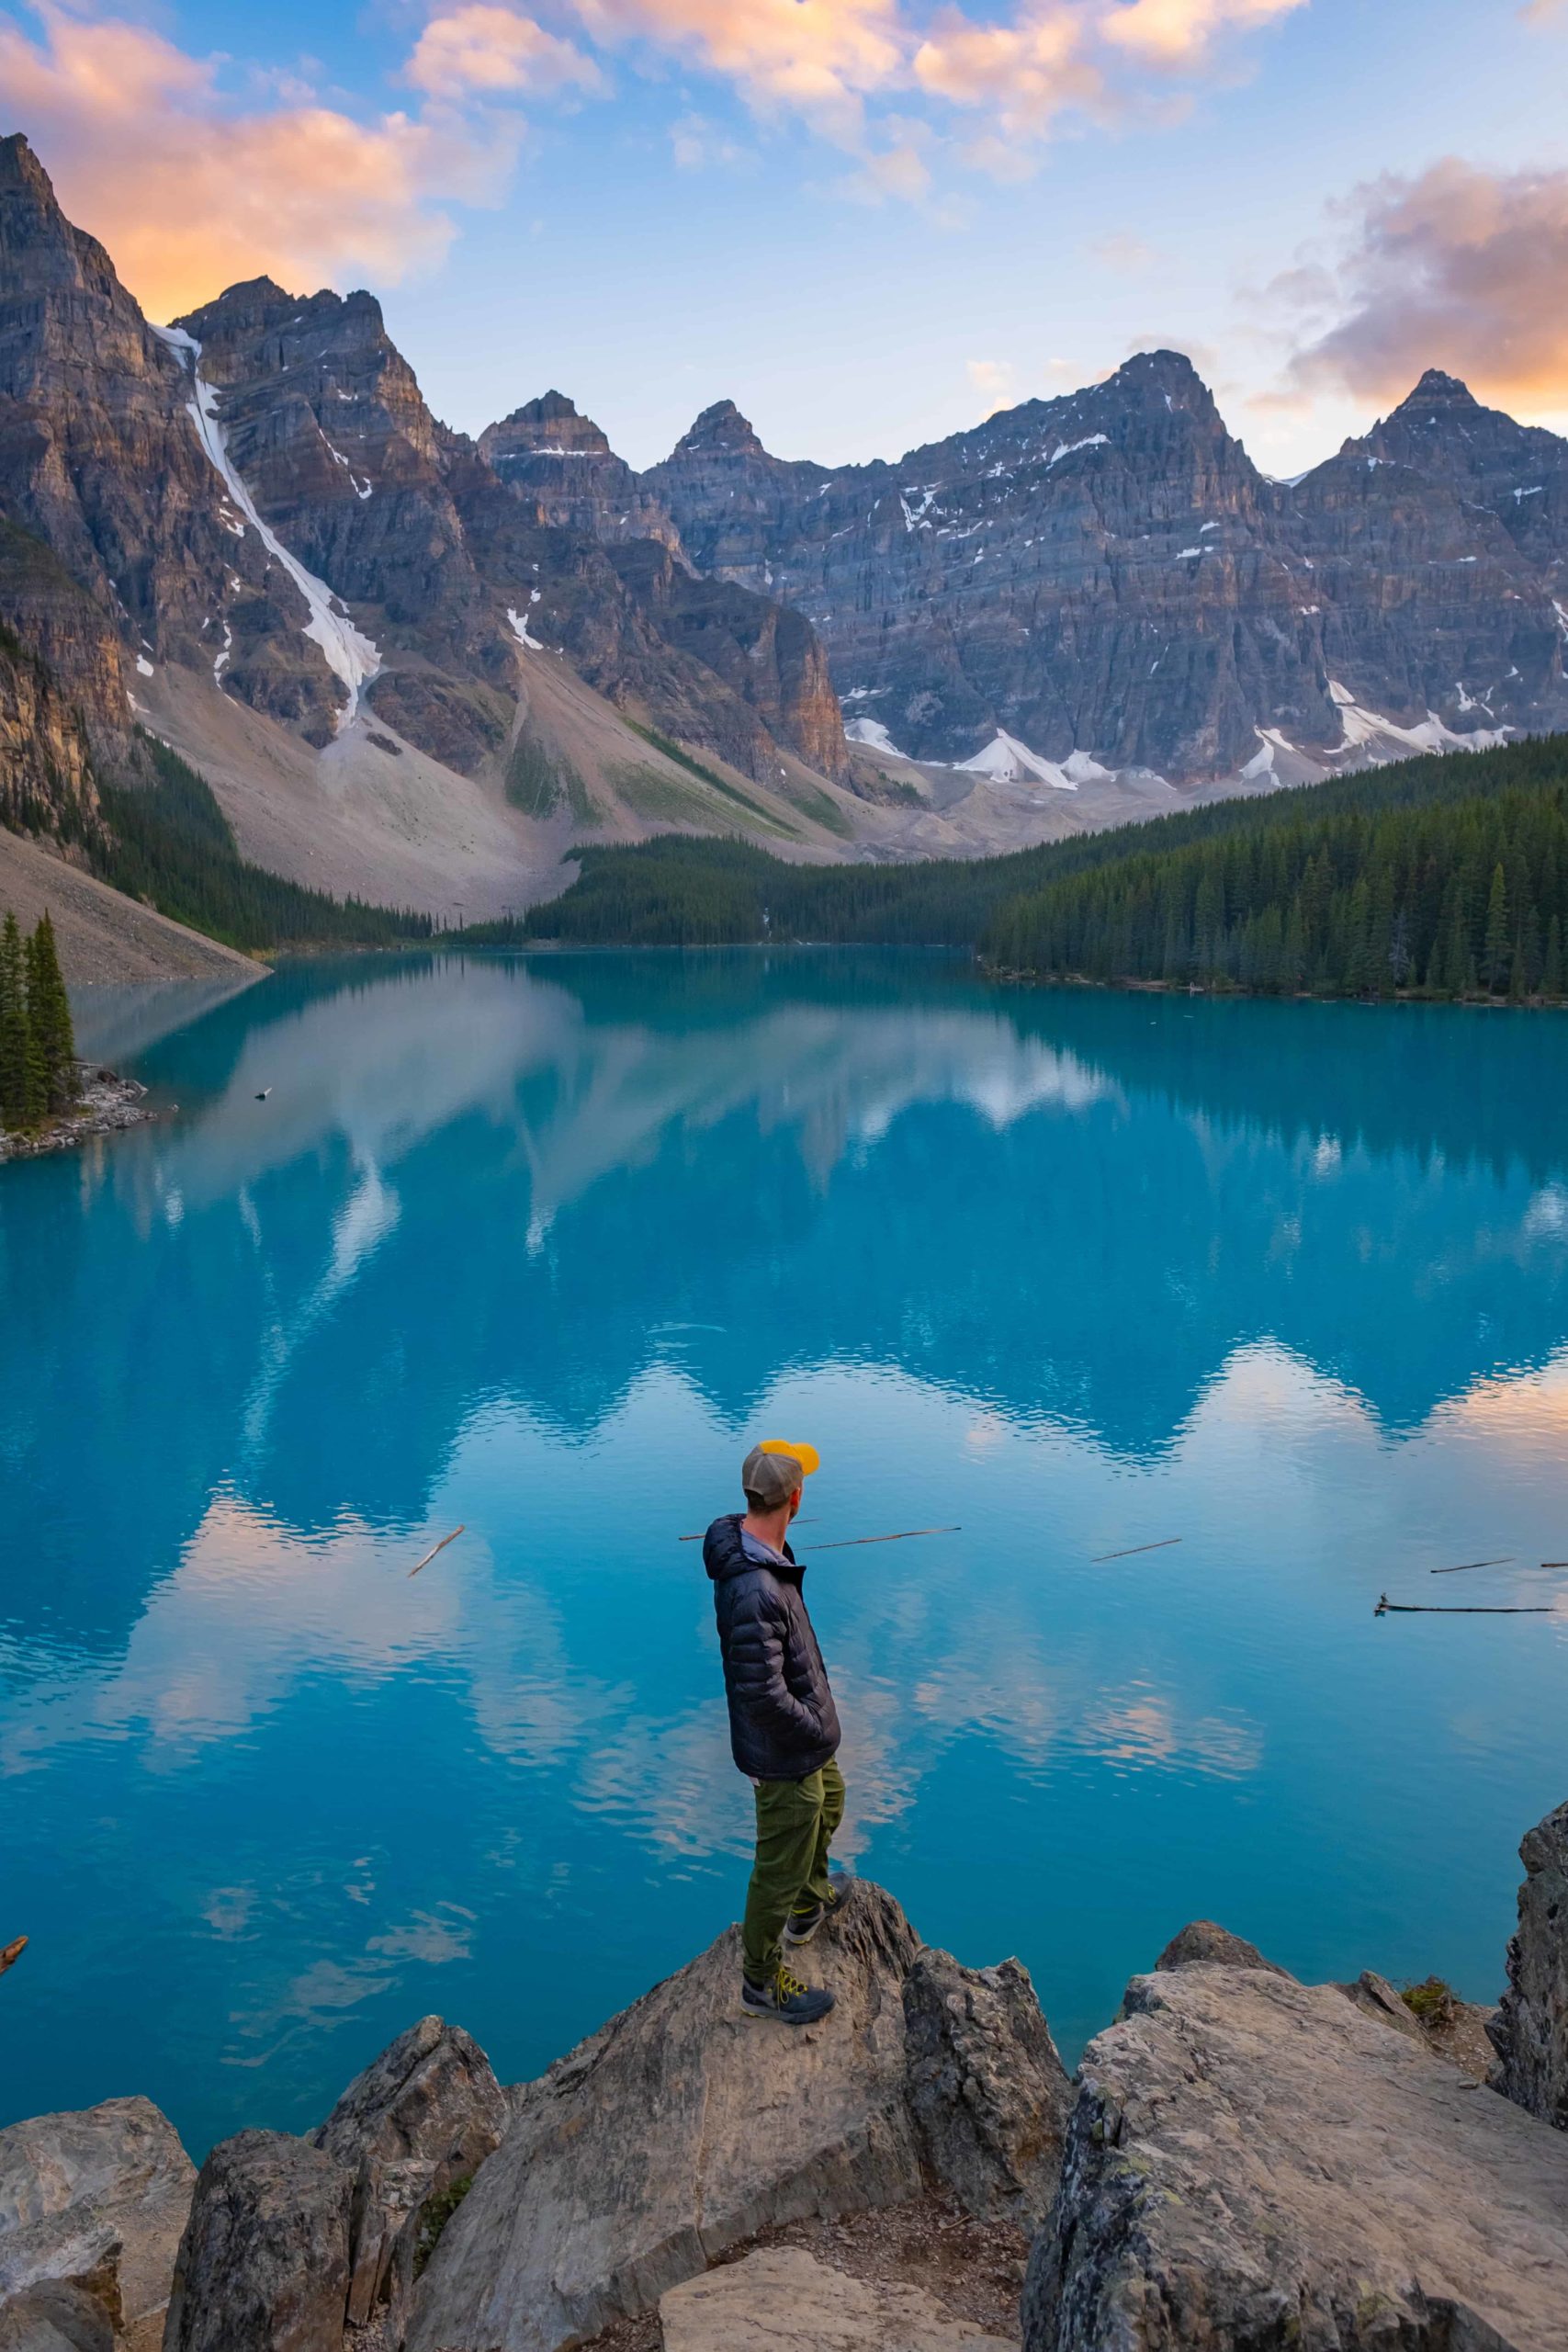 Cameron stands on Rock Pile at Moraine Lake